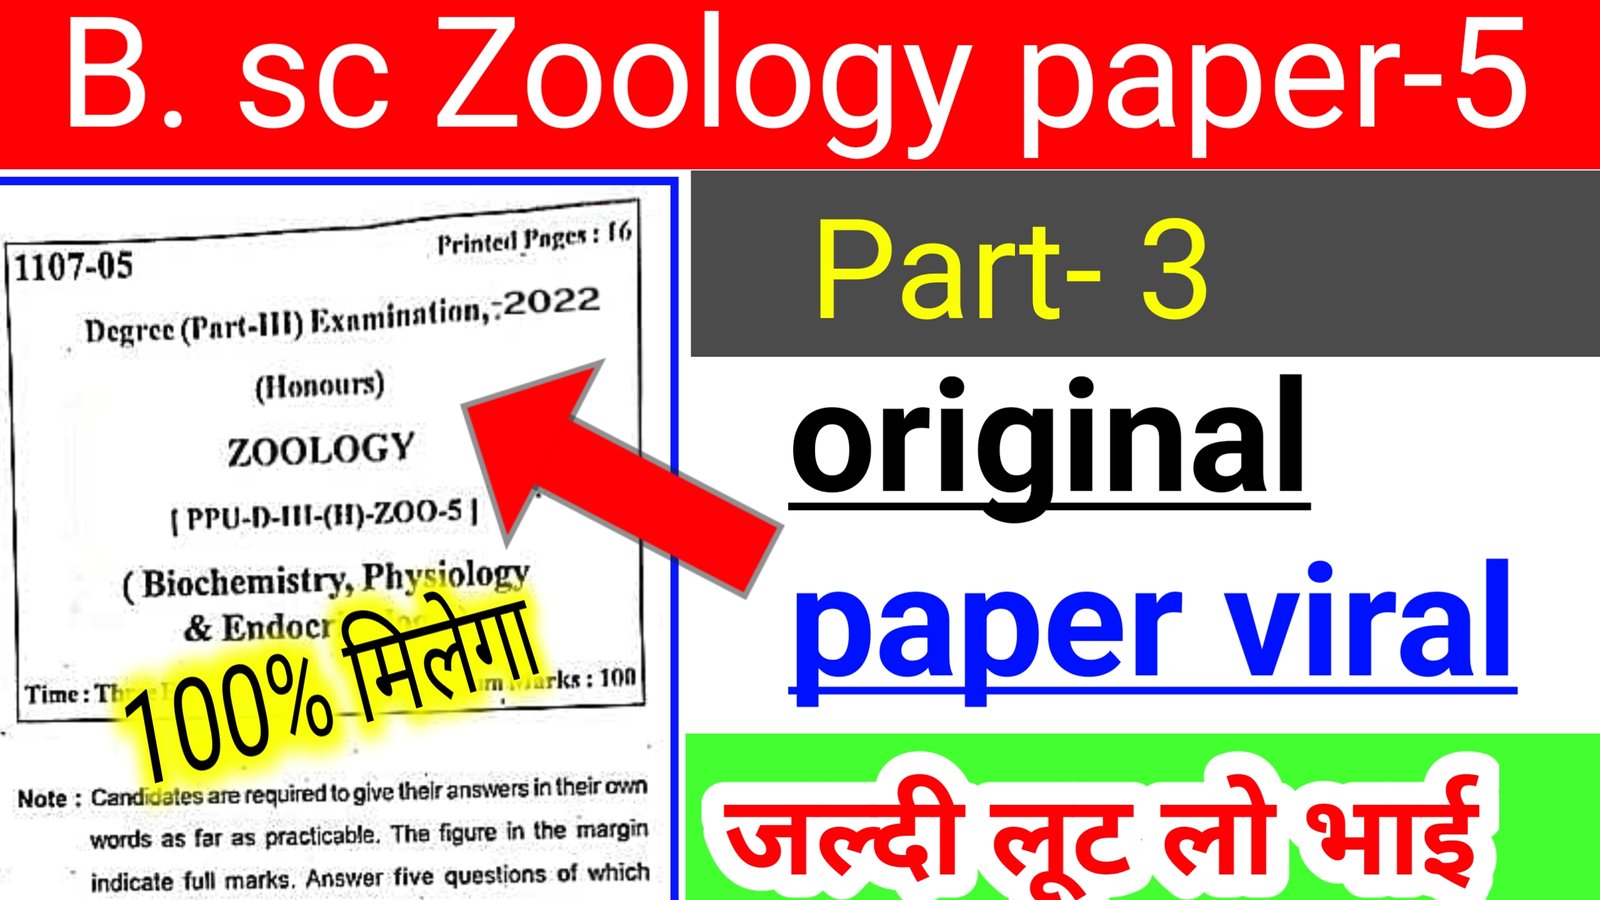 You are currently viewing B. Sc zoology paper-5 viral Question LNMU download kare Jaldi